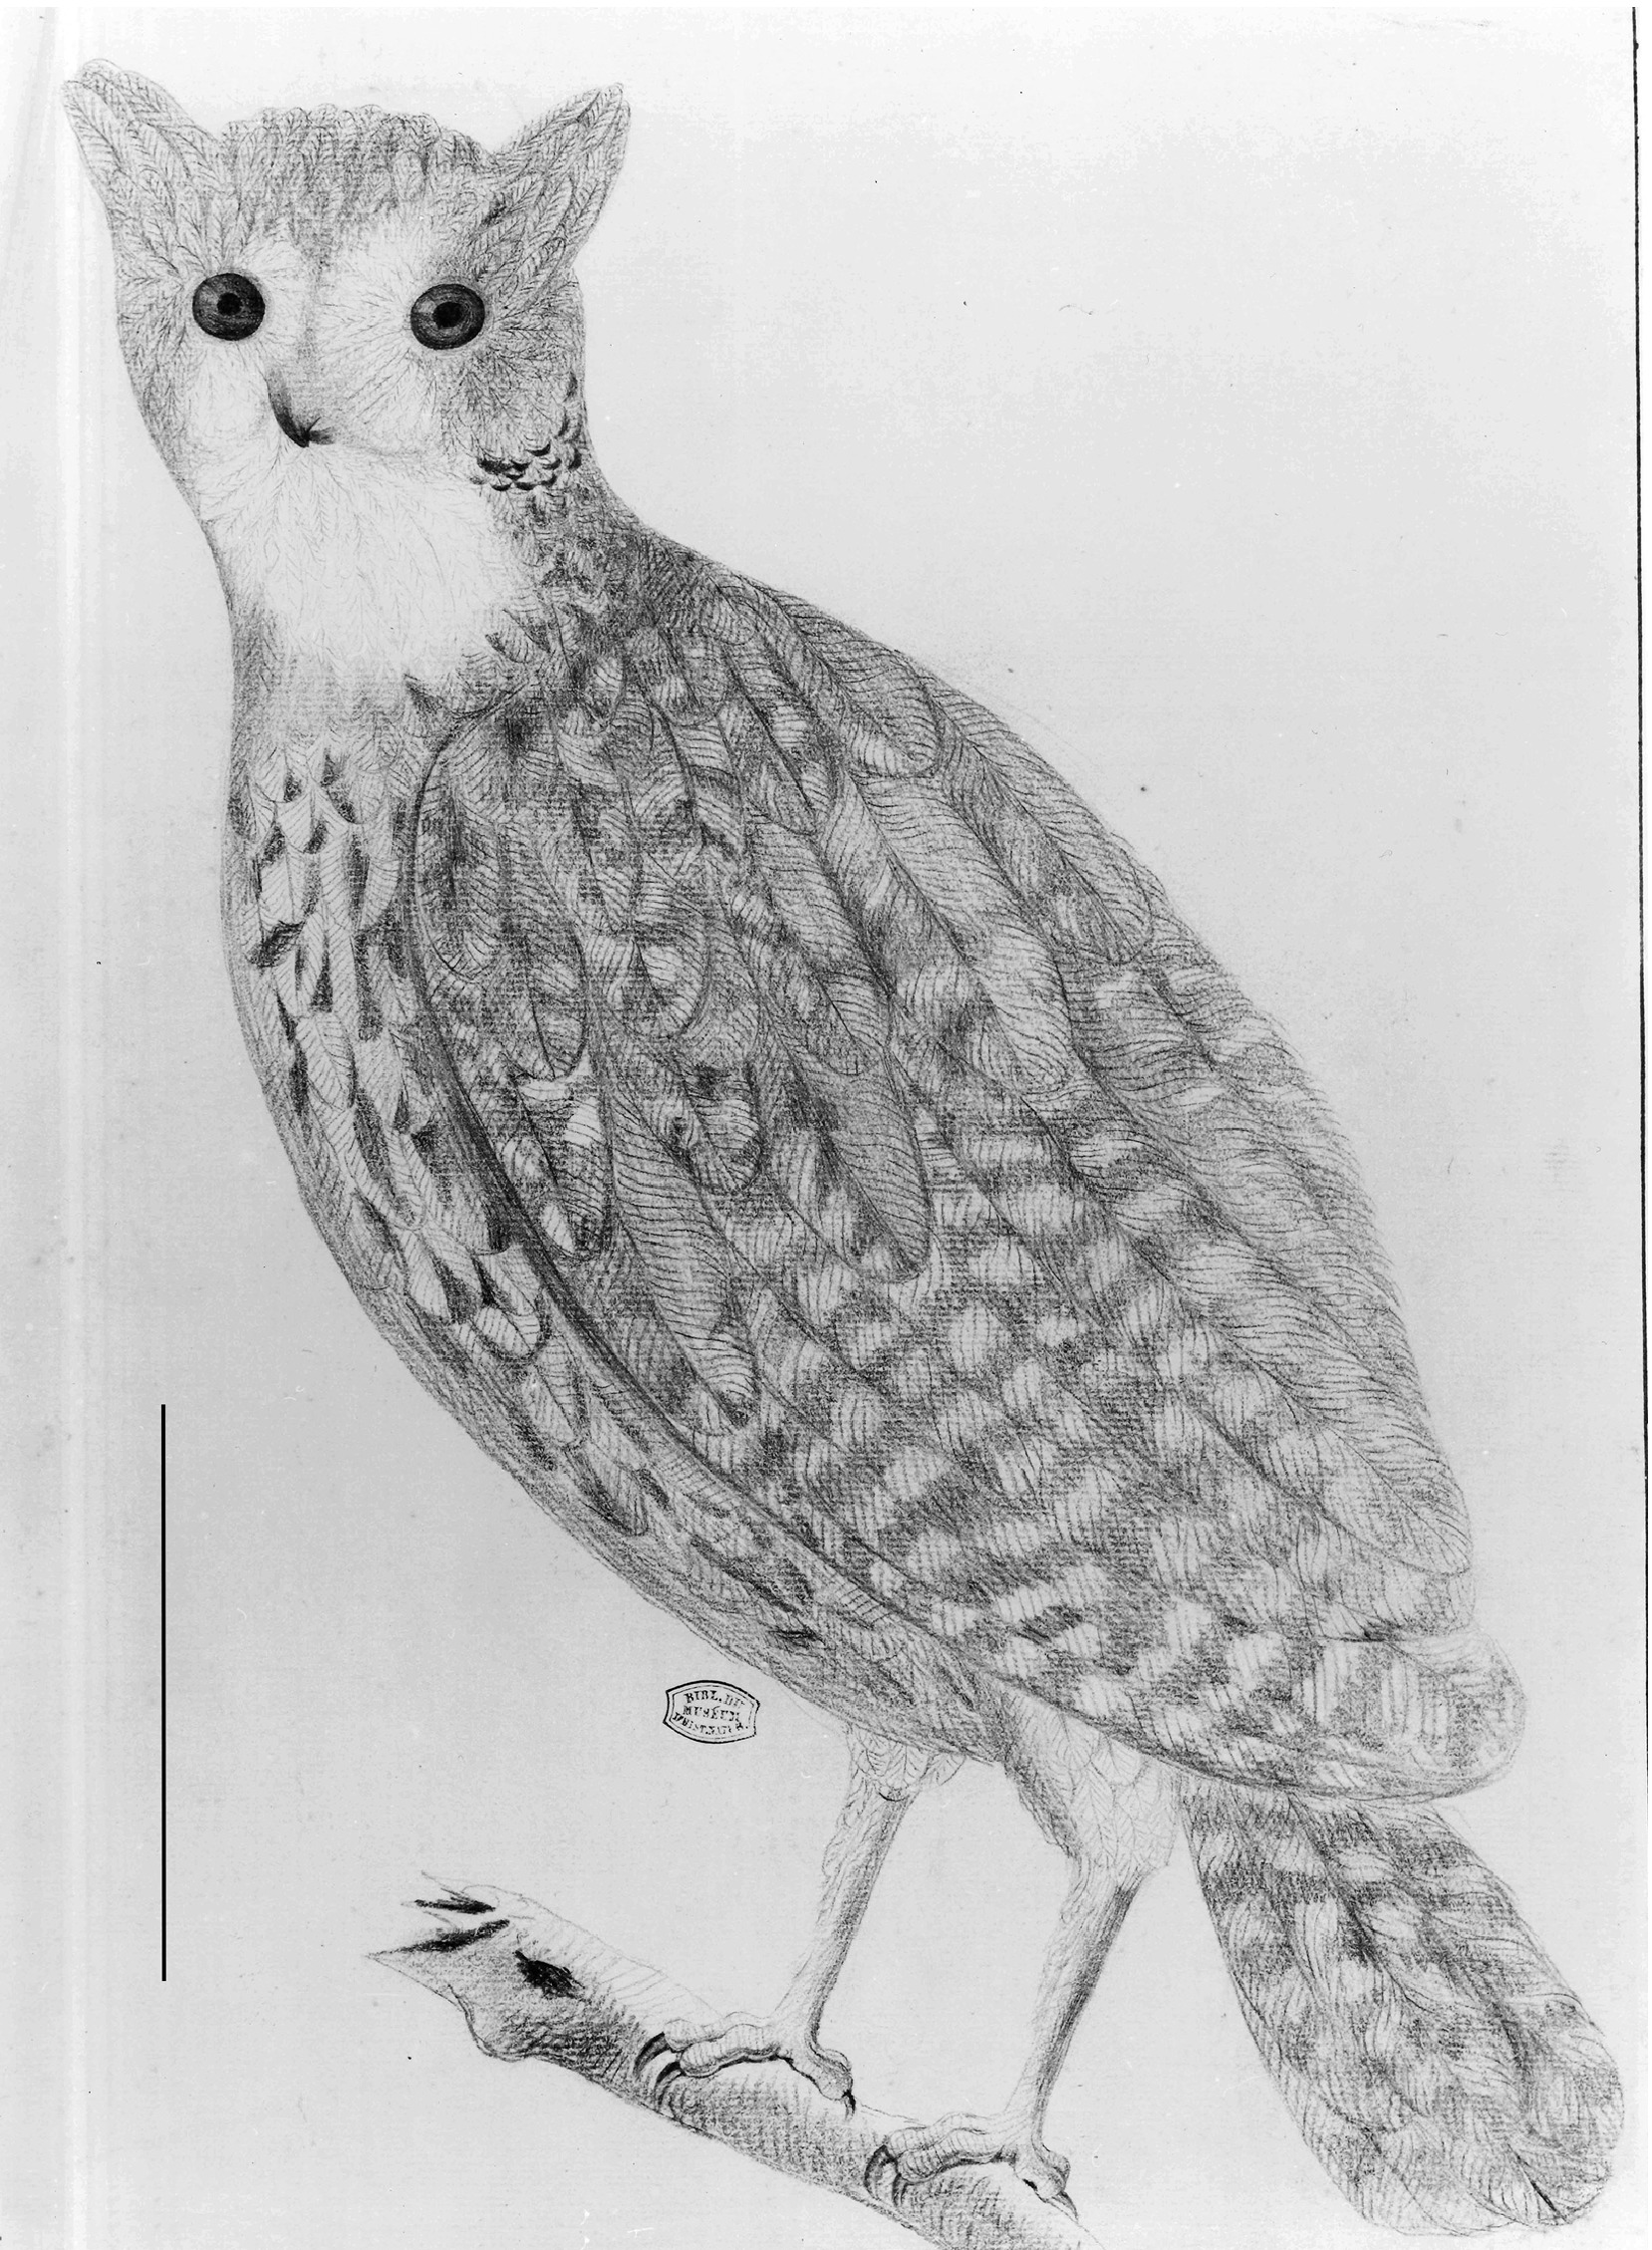 Pencil sketch by Jossigny of the Mauritius owl 'Mascarenotus sauzieri' with its long neck, flat head, and feathered ears